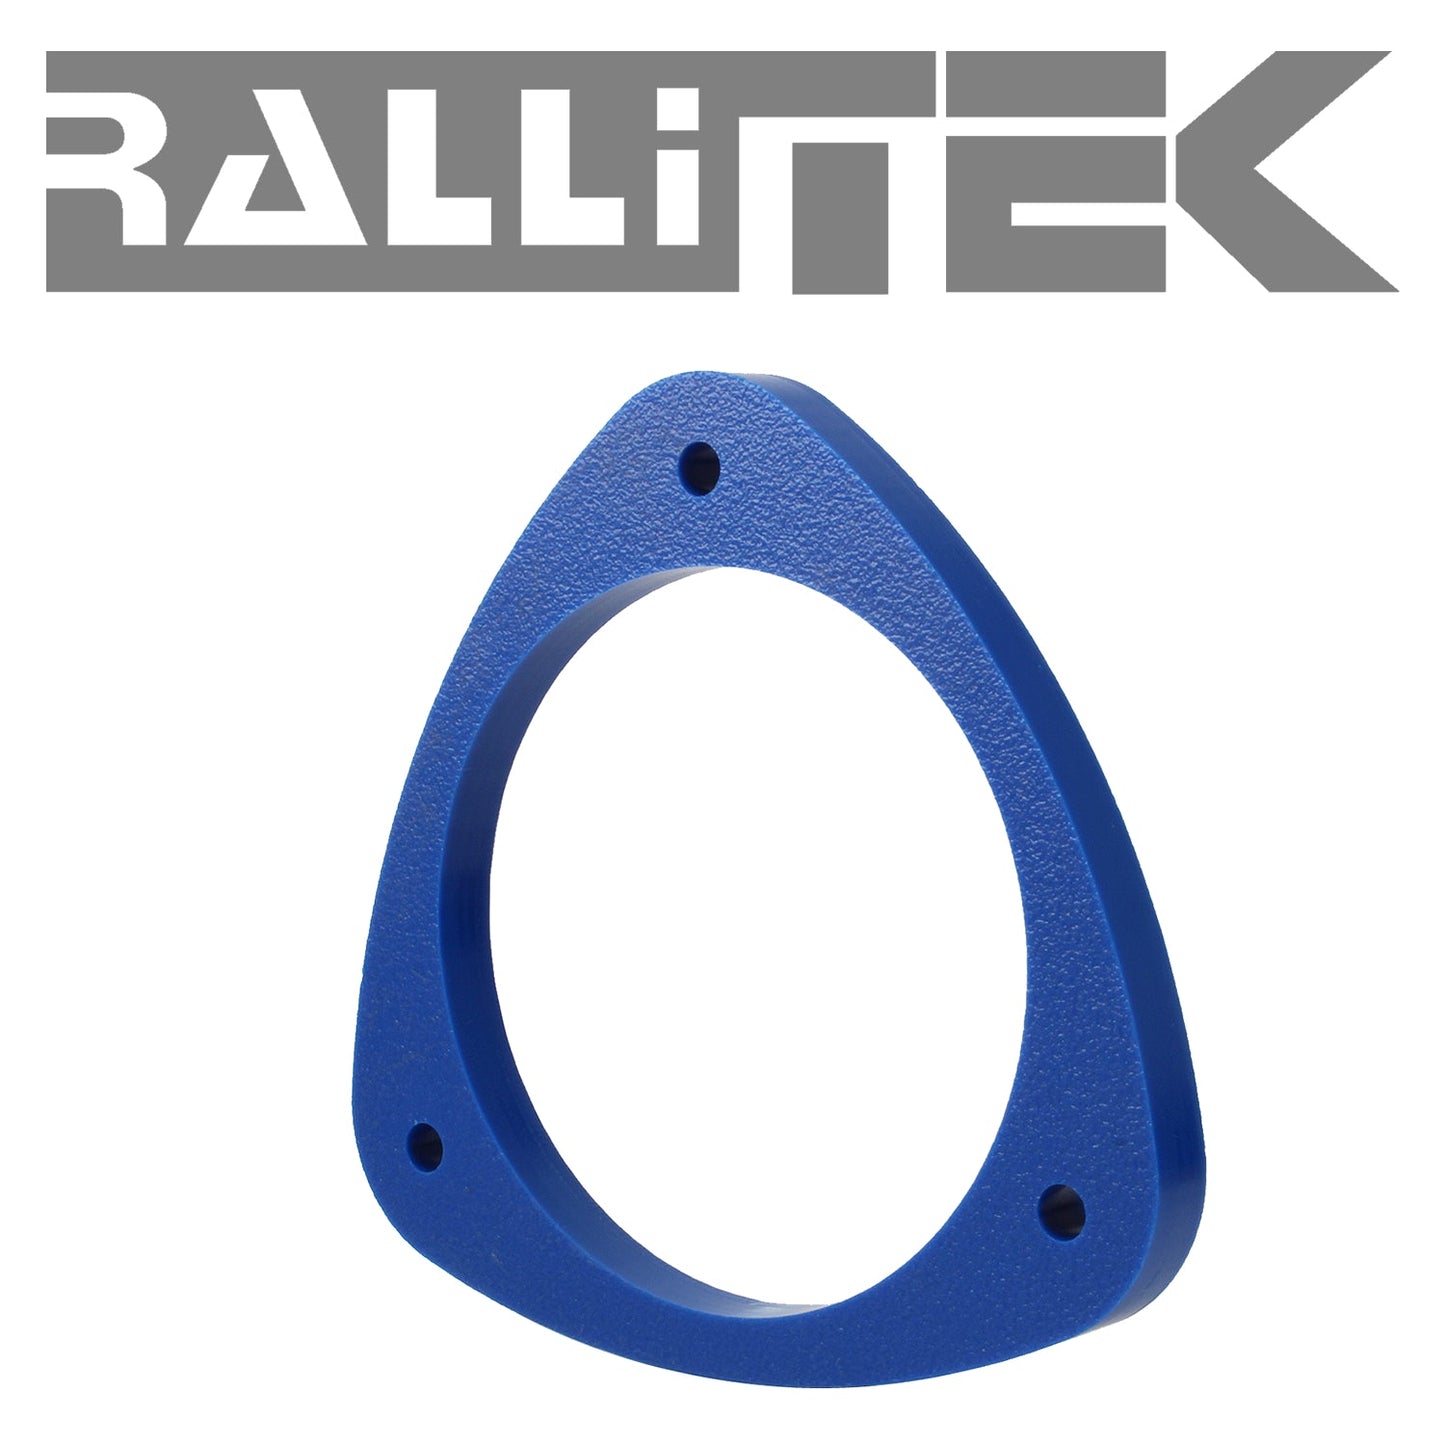 RalliTEK 0.5" Front Lift Kit Spacers - All Impreza 1993-2007 / Legacy 1990-2004 / Outback 2000-2004 / Outback 2010-2018 / More